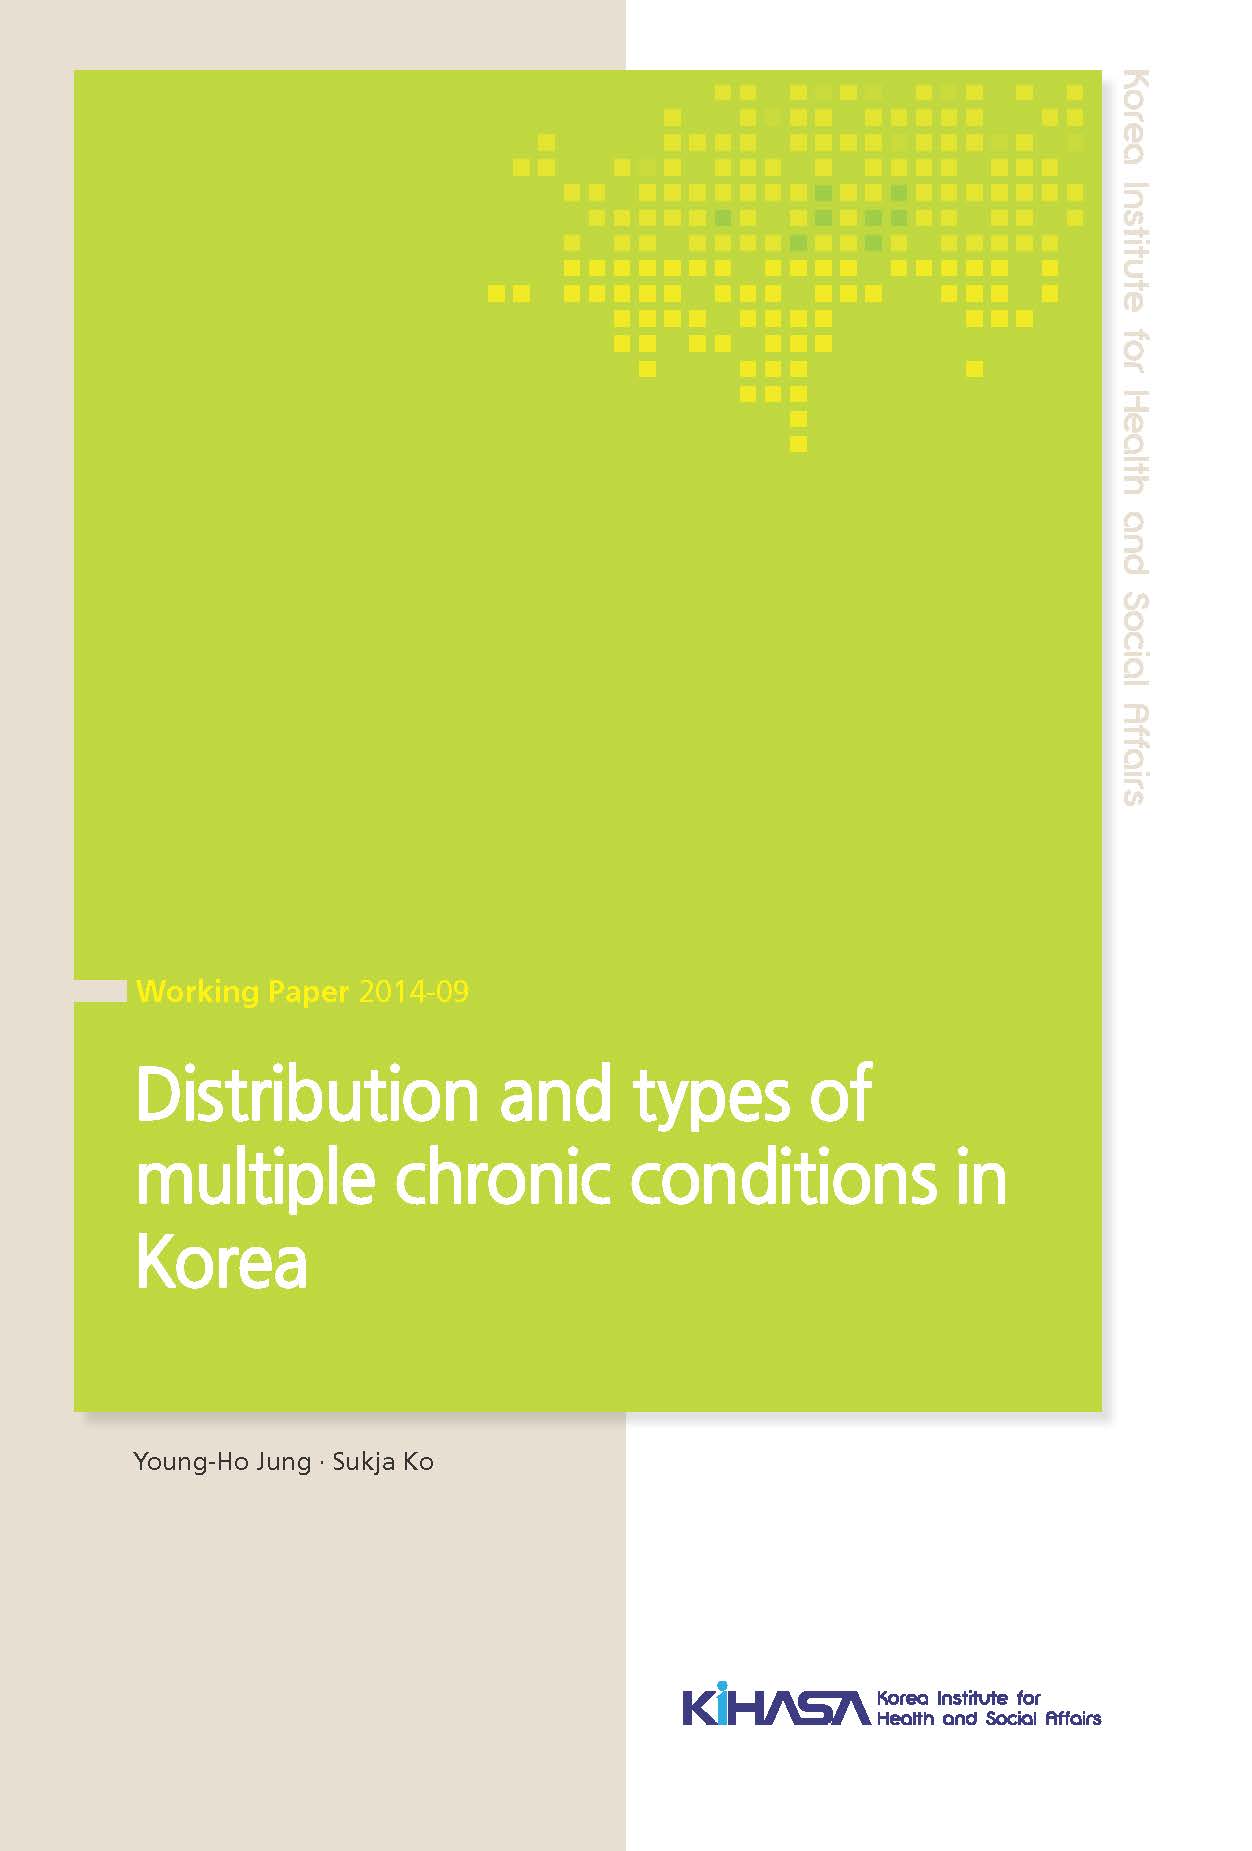 Distribution and types of multiple chronic conditions in Korea